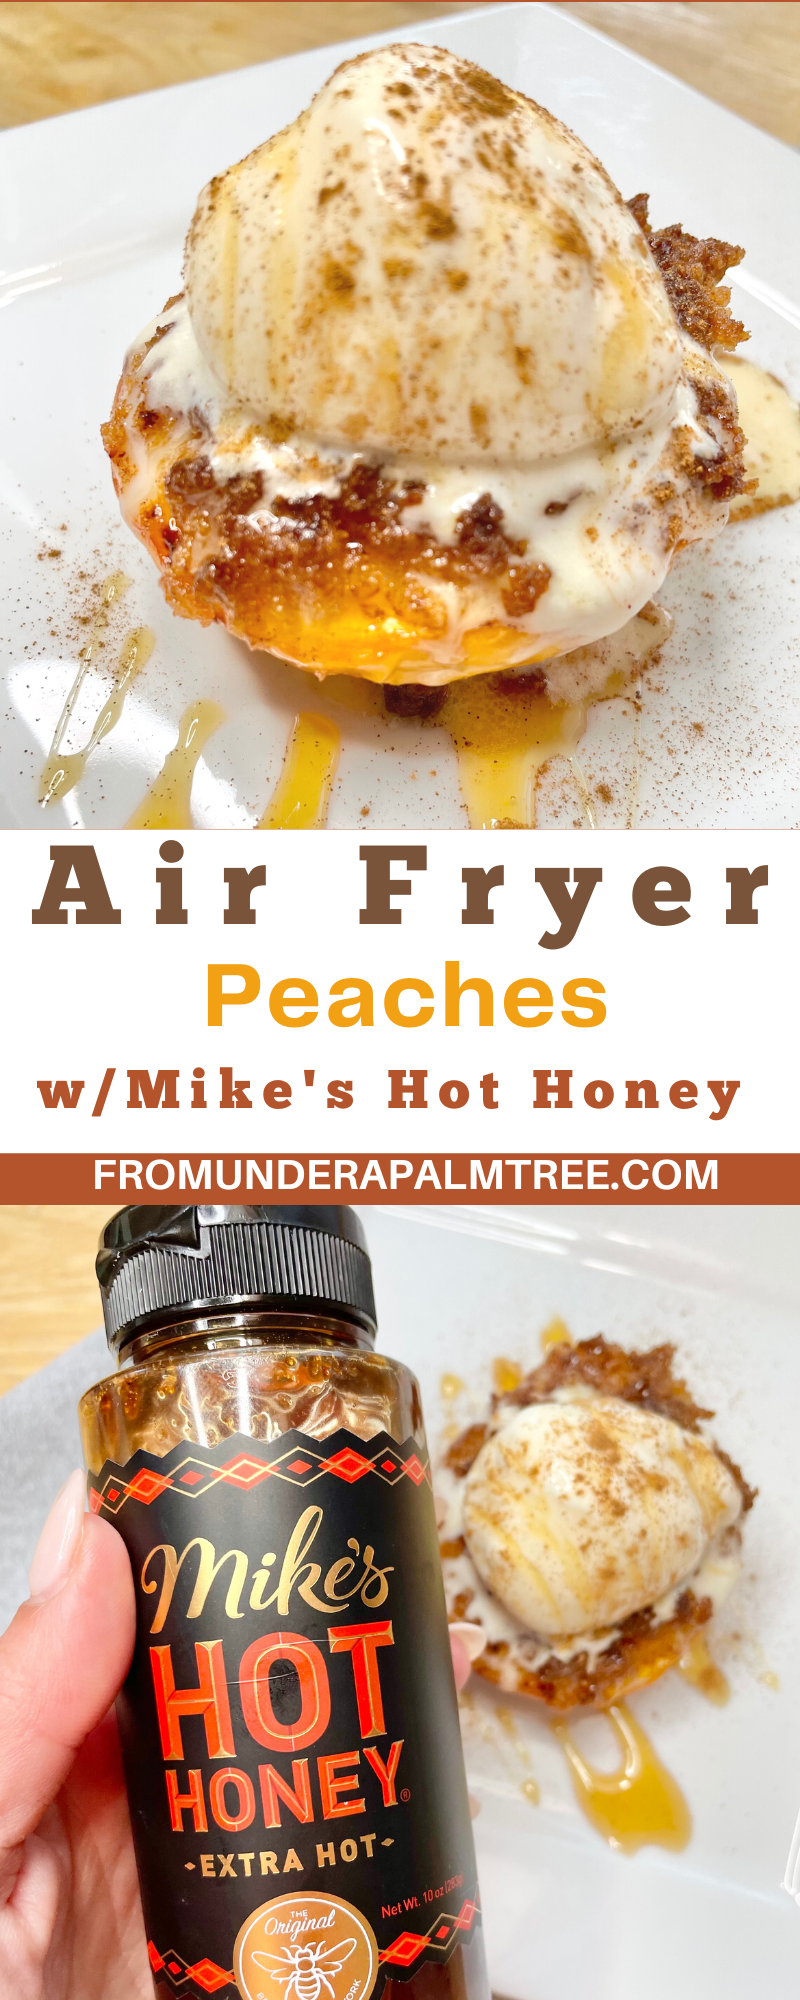 air fryer peaches | how to make peaches in the air fryer | air fried peaches | air fryer peach recipe | graham crackers crumble recipe | grilled peaches | how to grill peaches in the air fryer | summer dessert | summer recipes | grill recipes | dessert | easy dessert recipe | grilled fruit | air fryer recipes | air fried foods | peach recipe | peaches | peaches on the grill | 